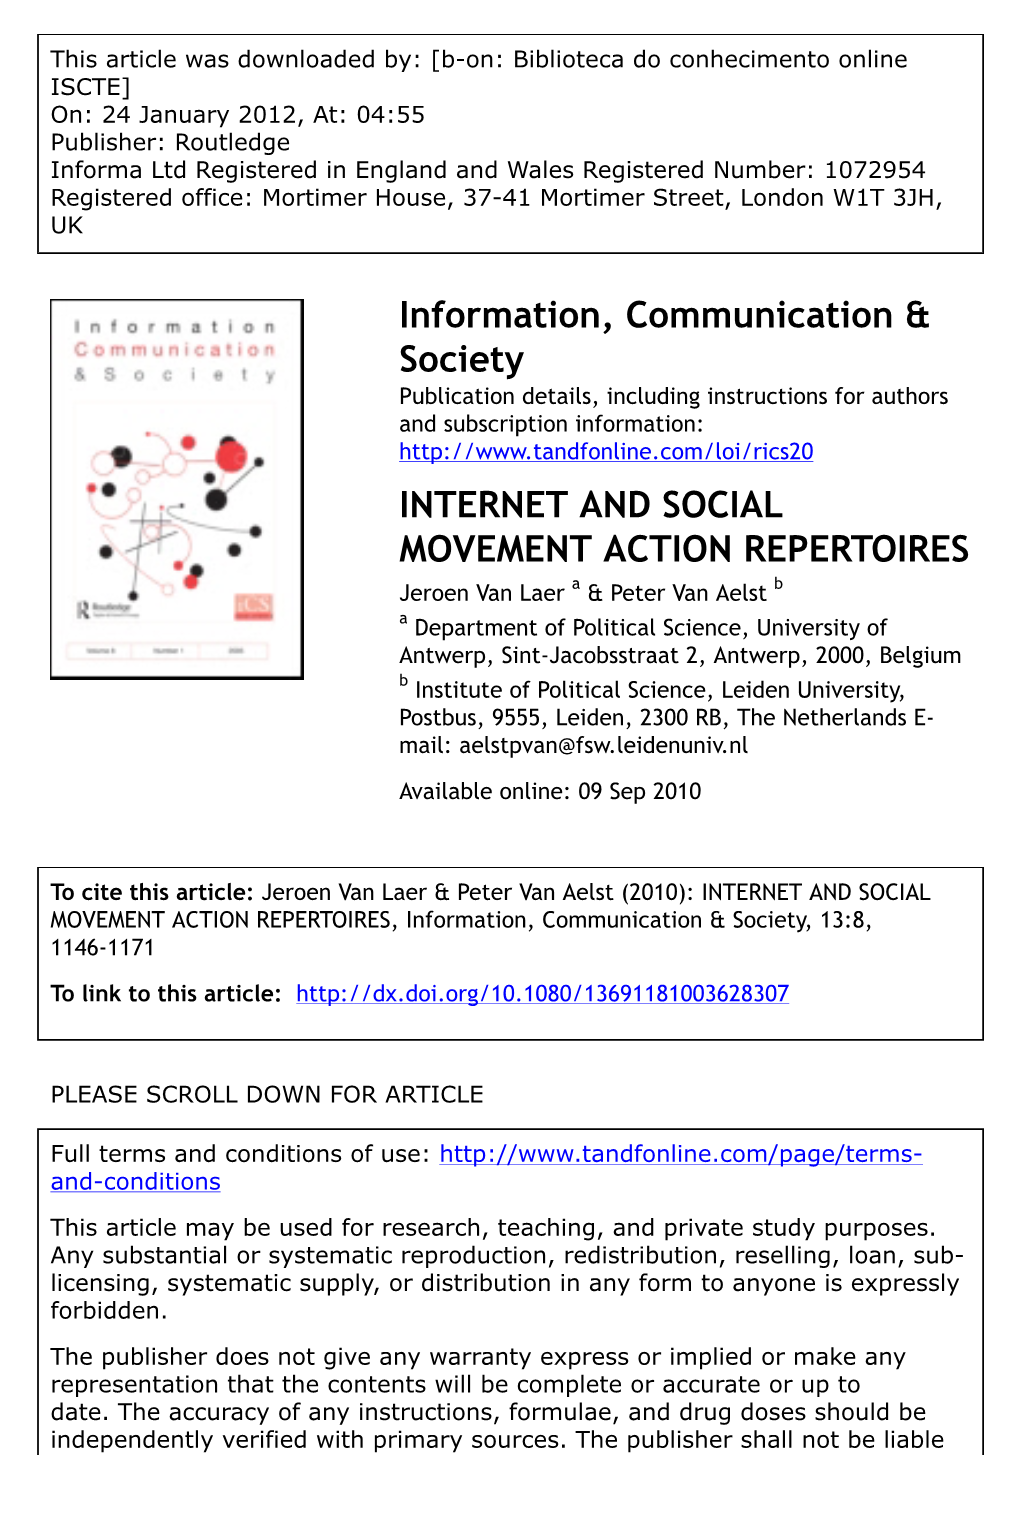 Internet and Social Movement Action Repertoires